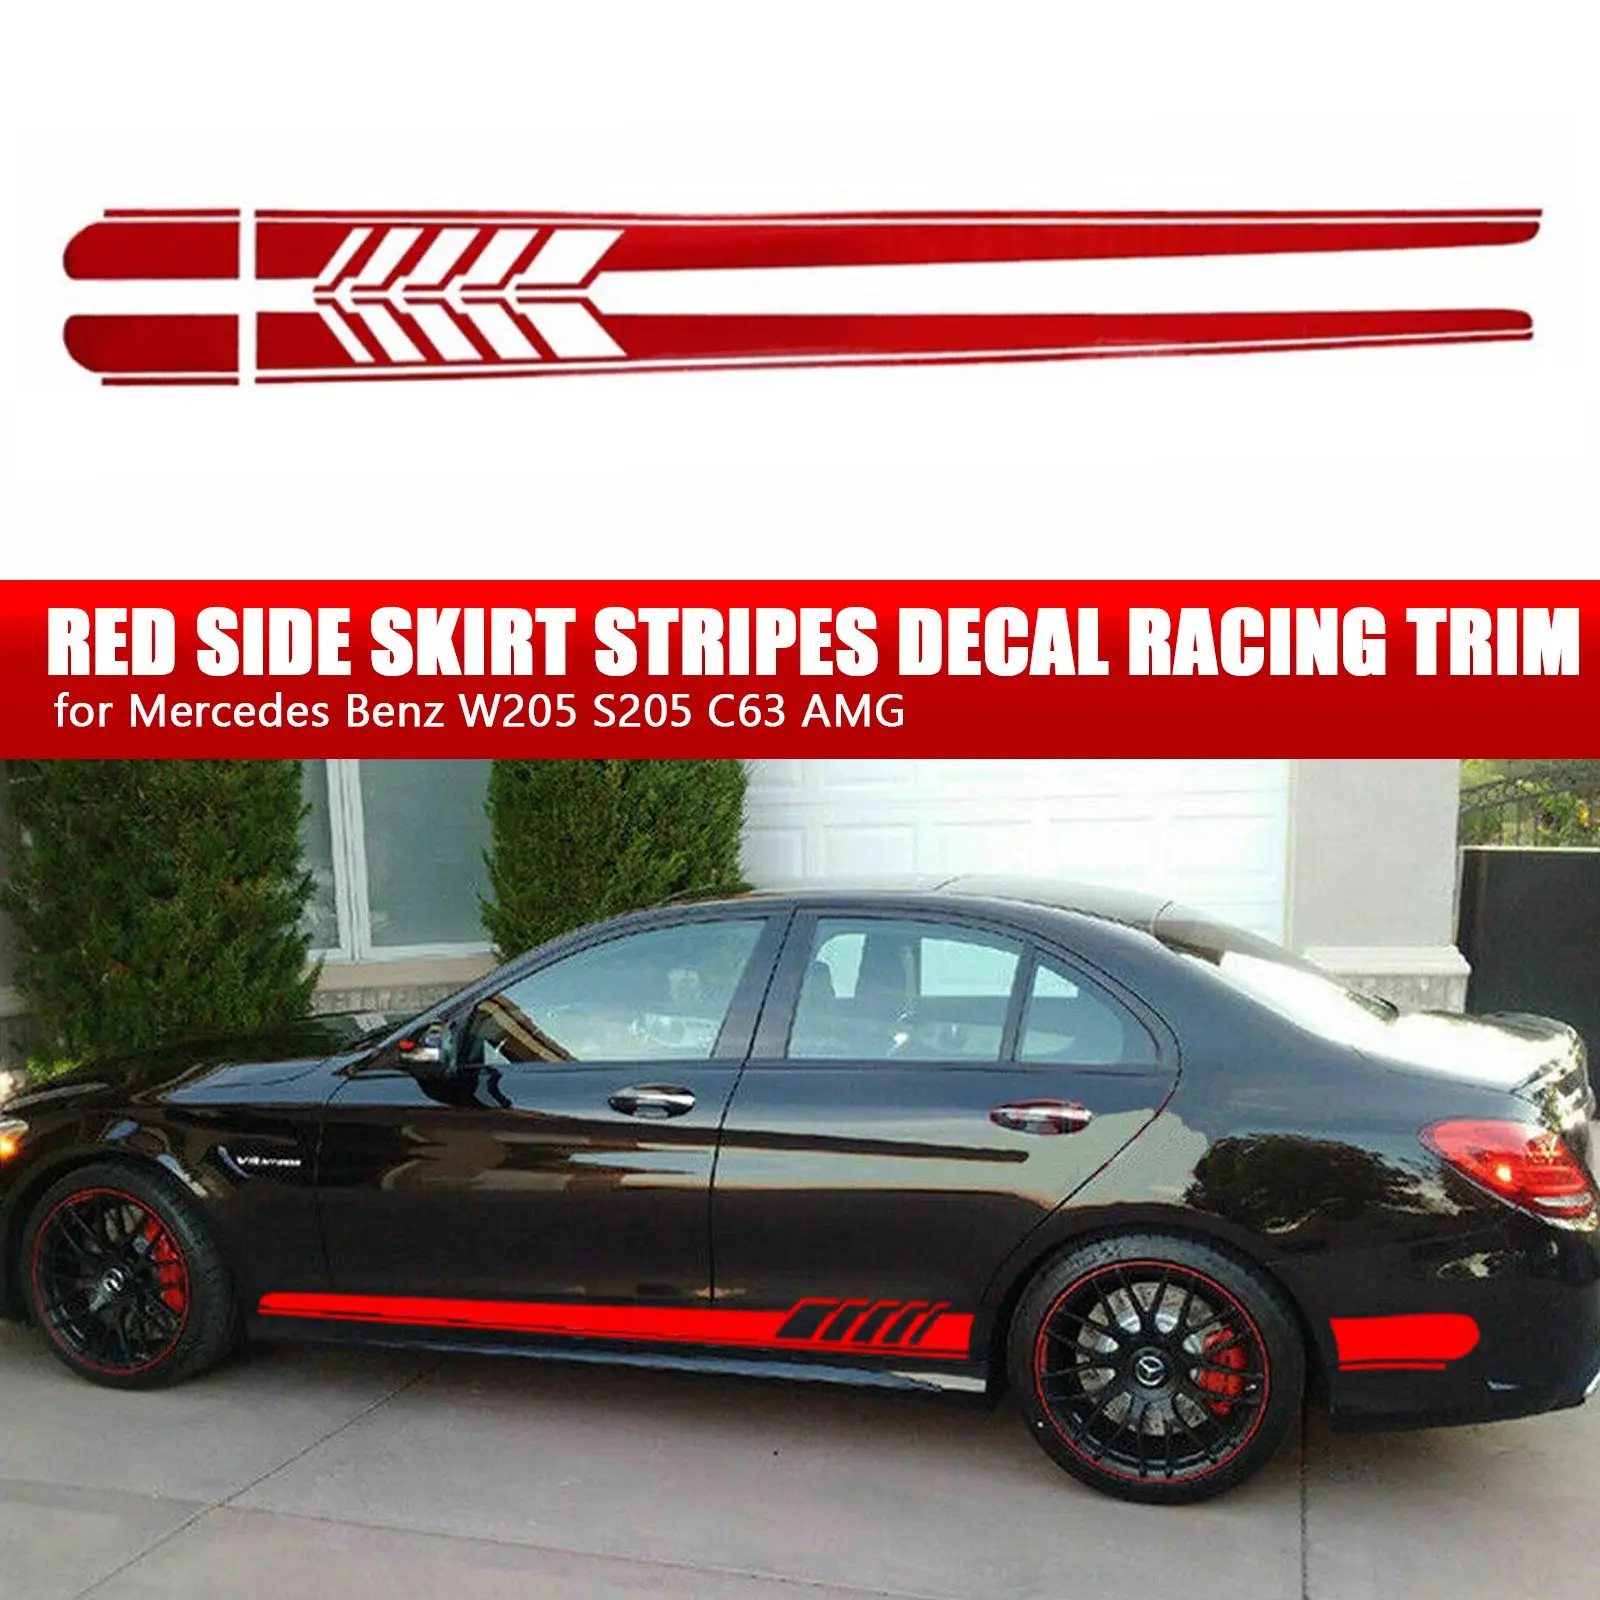 2PCS Red Side Skirt Stripes Decal Racing Trim Car Body Vinyl Sticker Decal  for Mercedes Benz W205 S205 C63 AMG - AliExpress